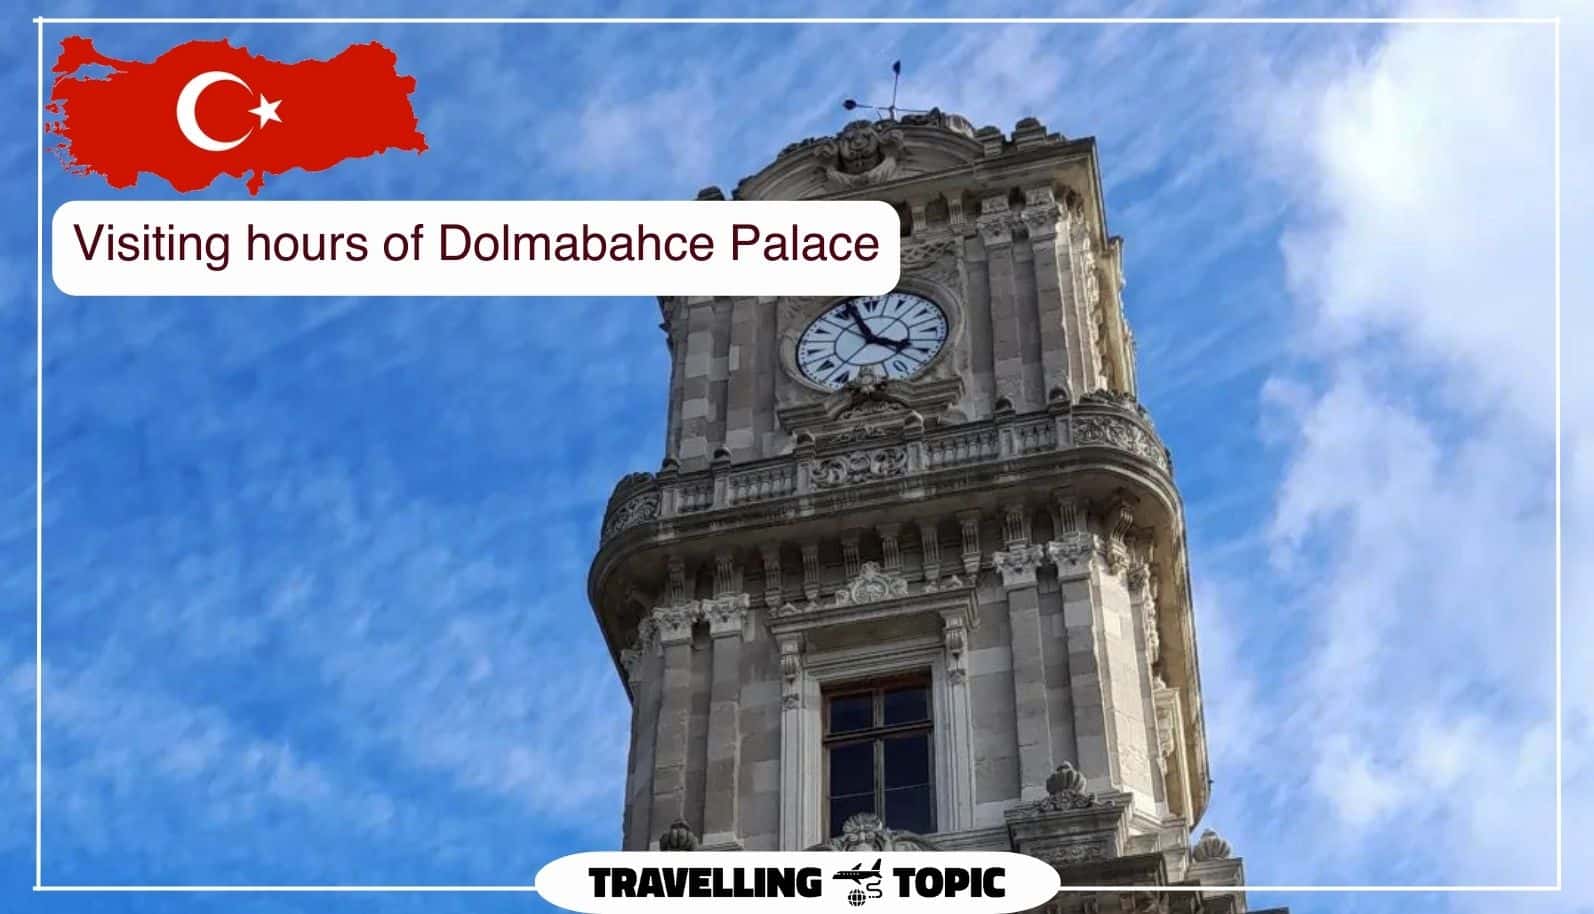 Visiting hours of Dolmabahce Palace